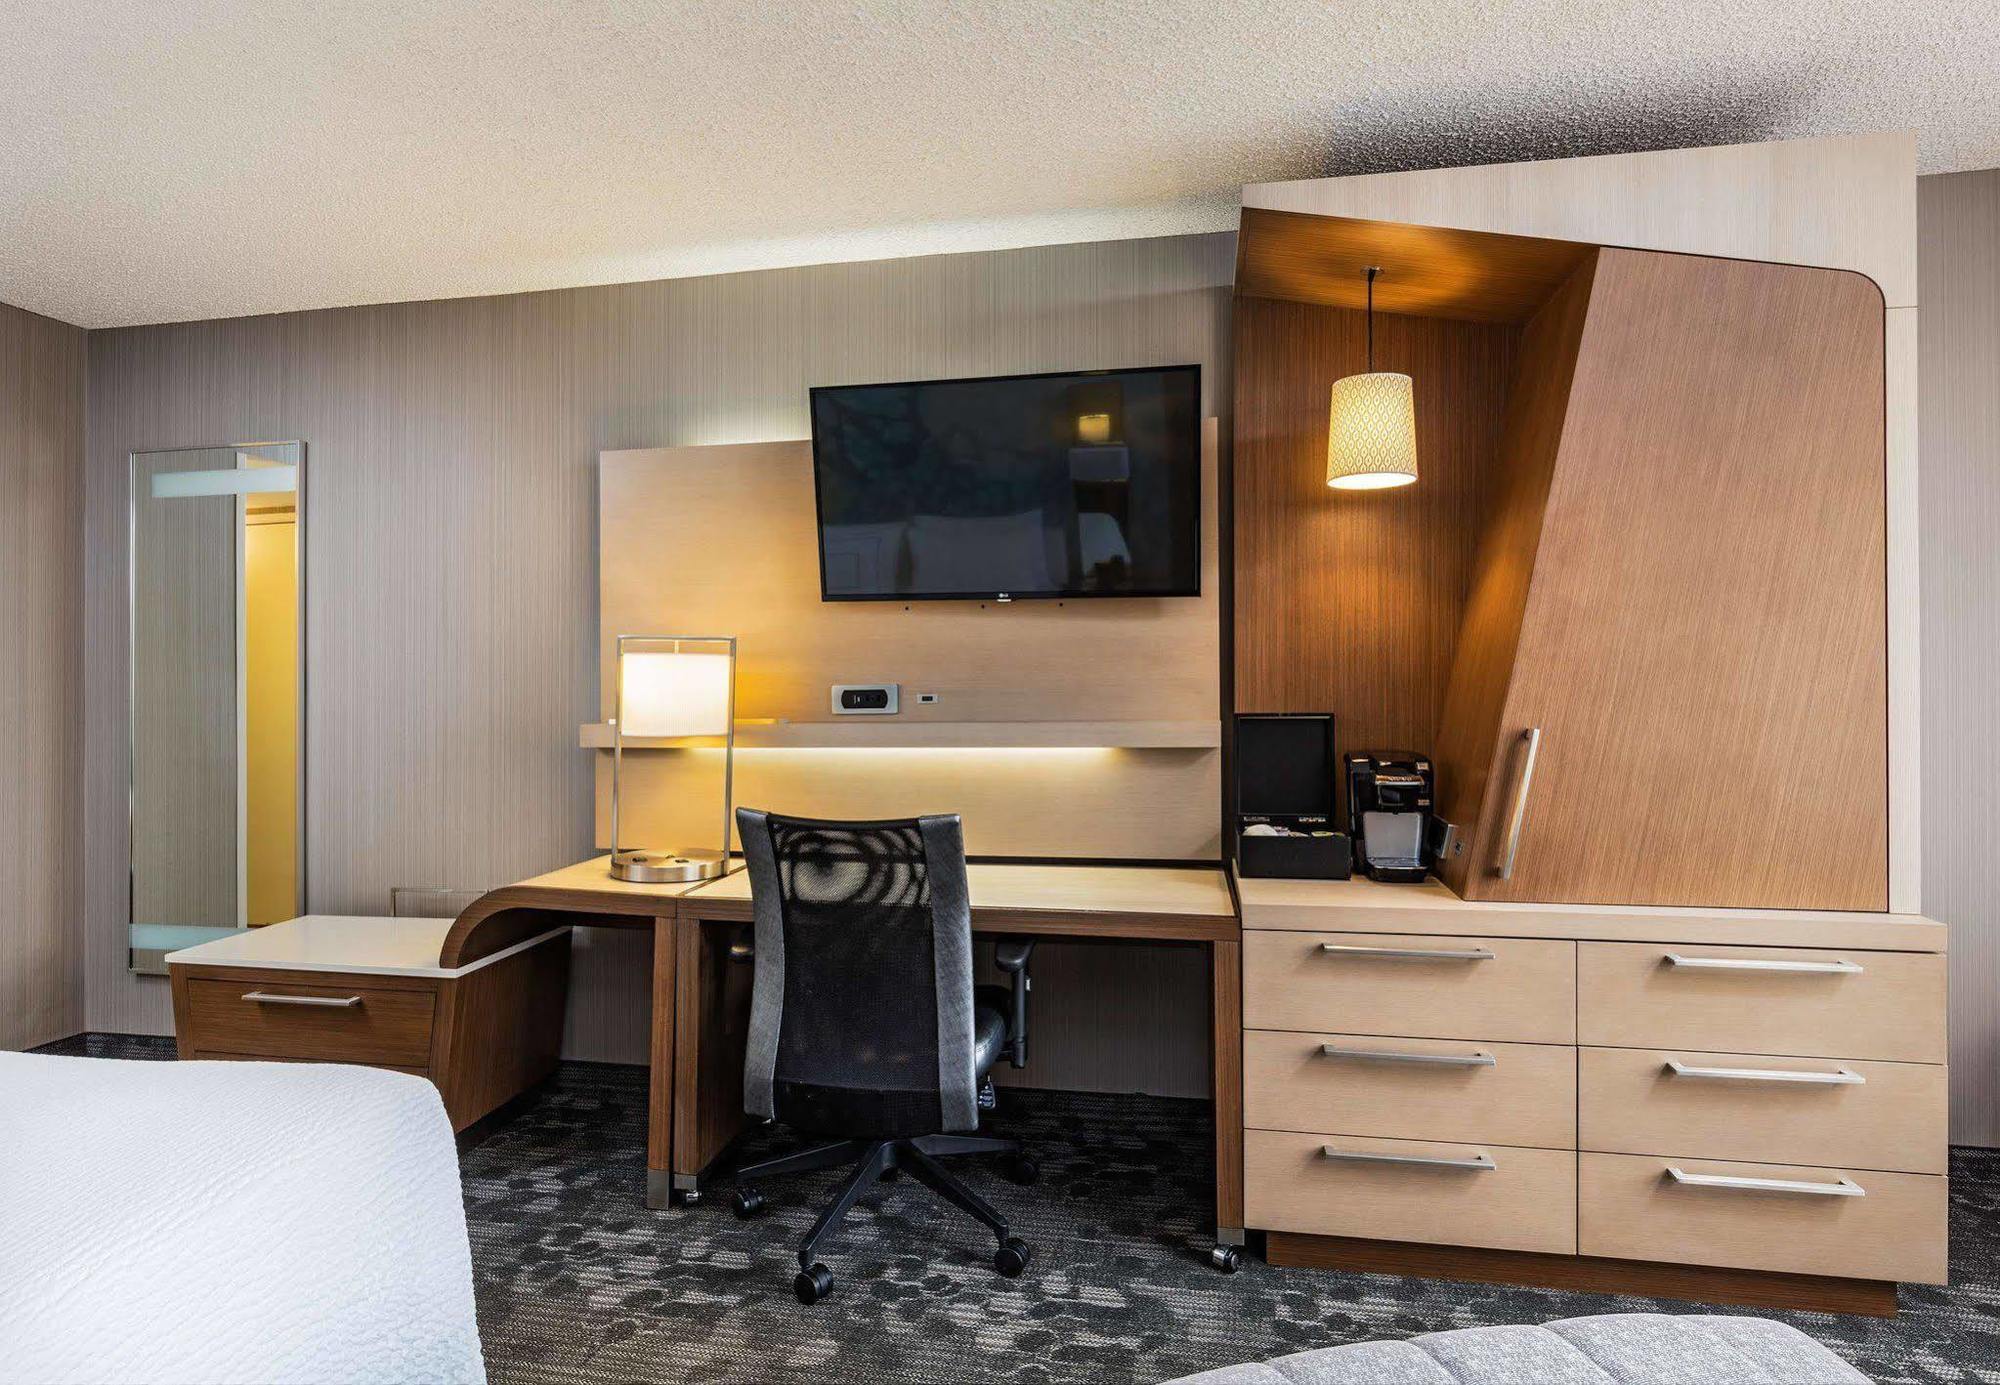 Courtyard By Marriott Riverside Ucr/Moreno Valley Area Room photo